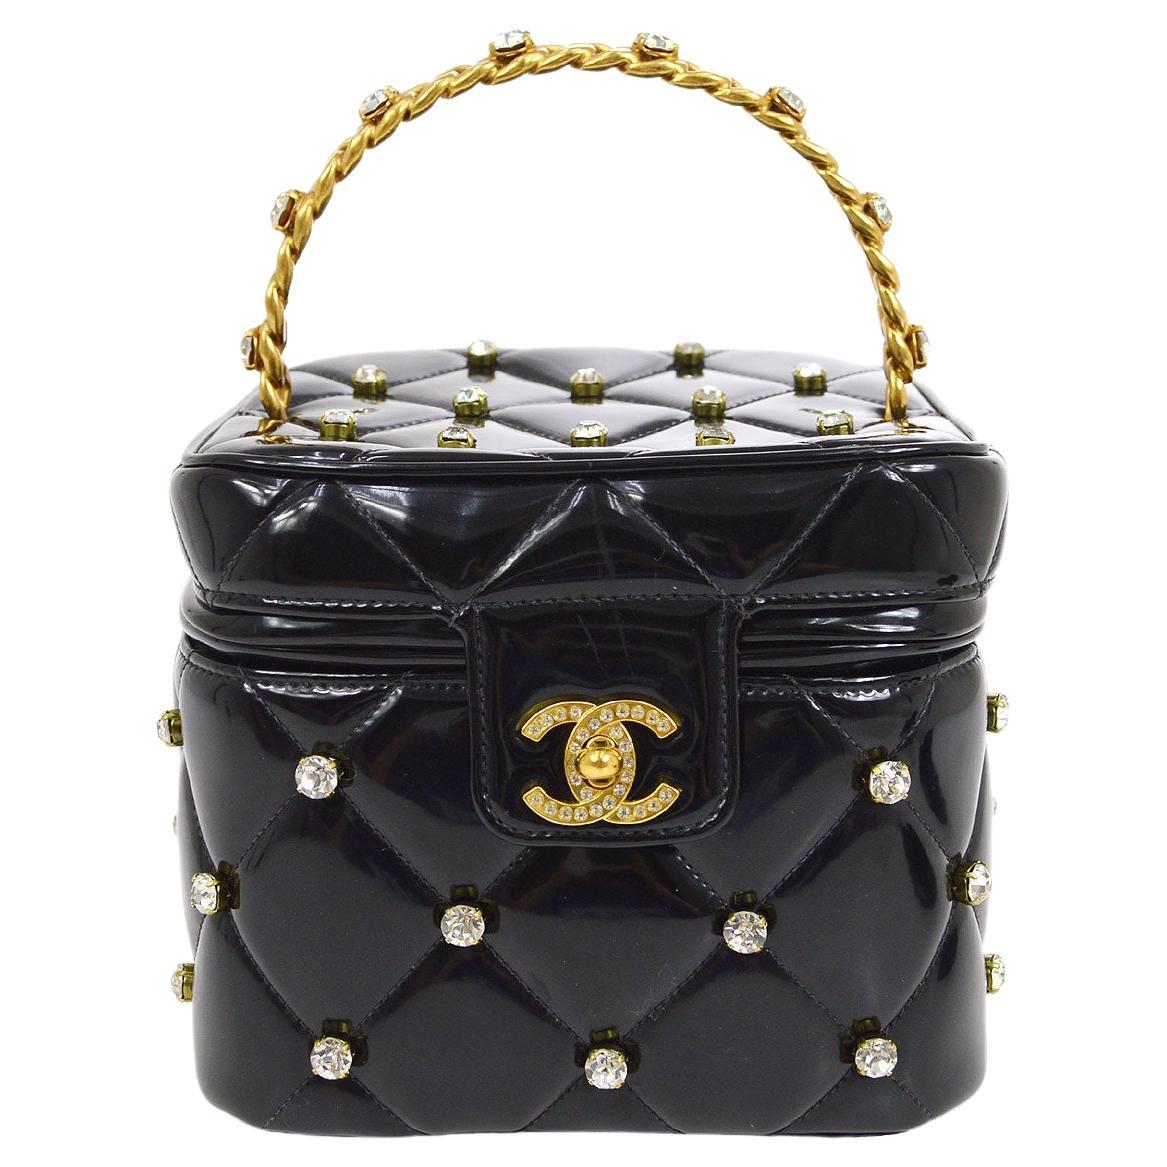 Complete Review of the Chanel Vanity Bag, Handbags and Accessories